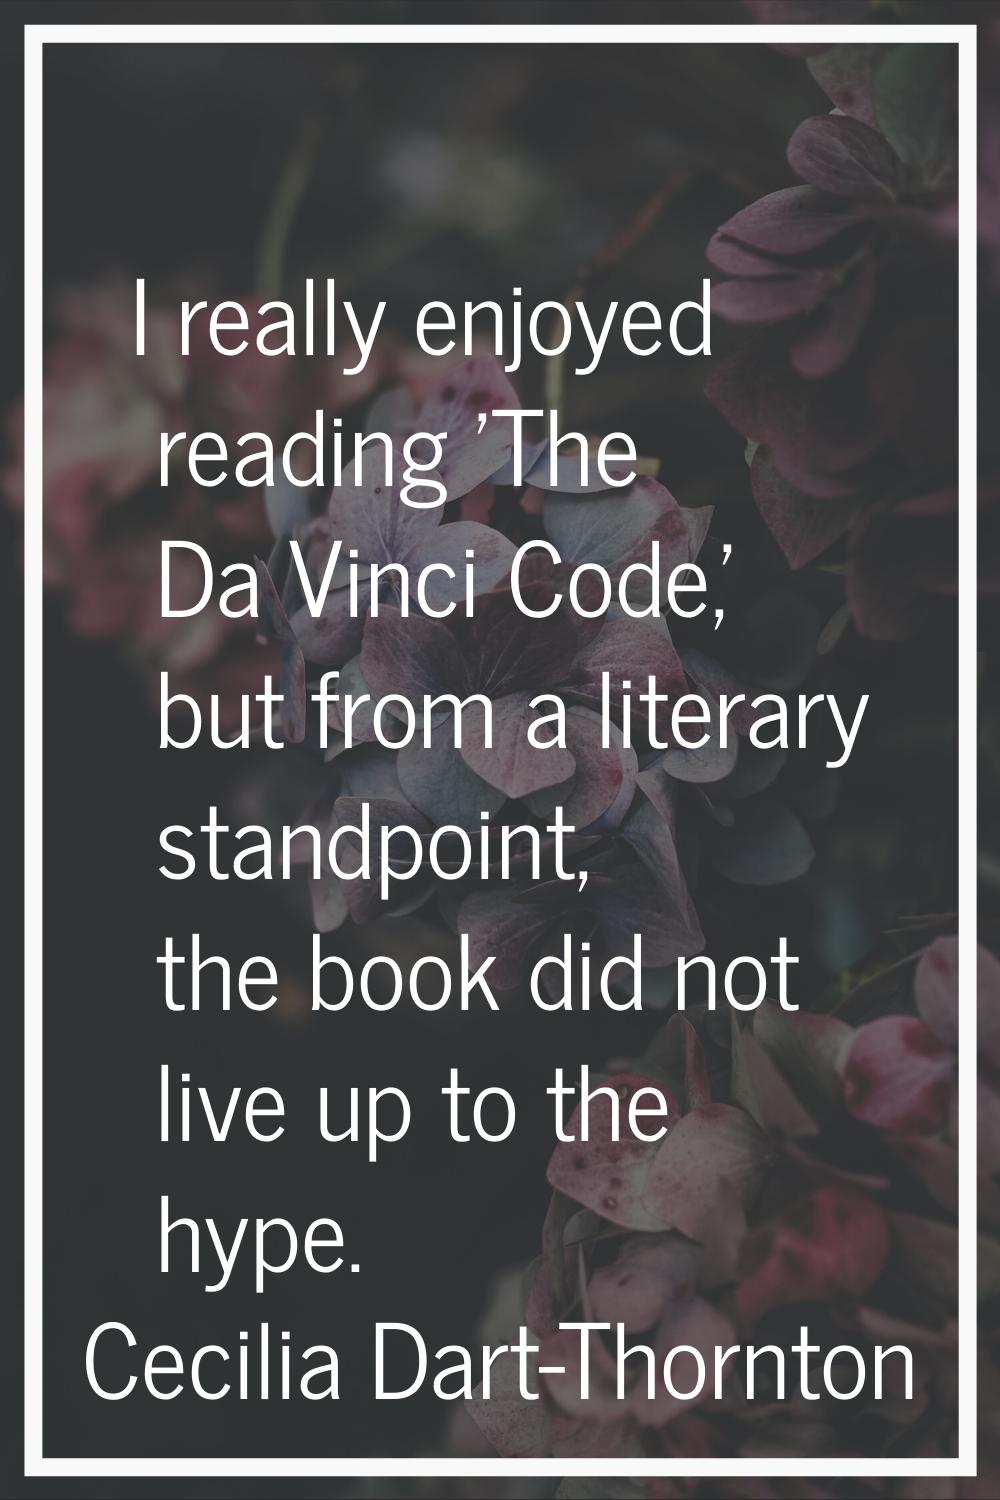 I really enjoyed reading 'The Da Vinci Code,' but from a literary standpoint, the book did not live